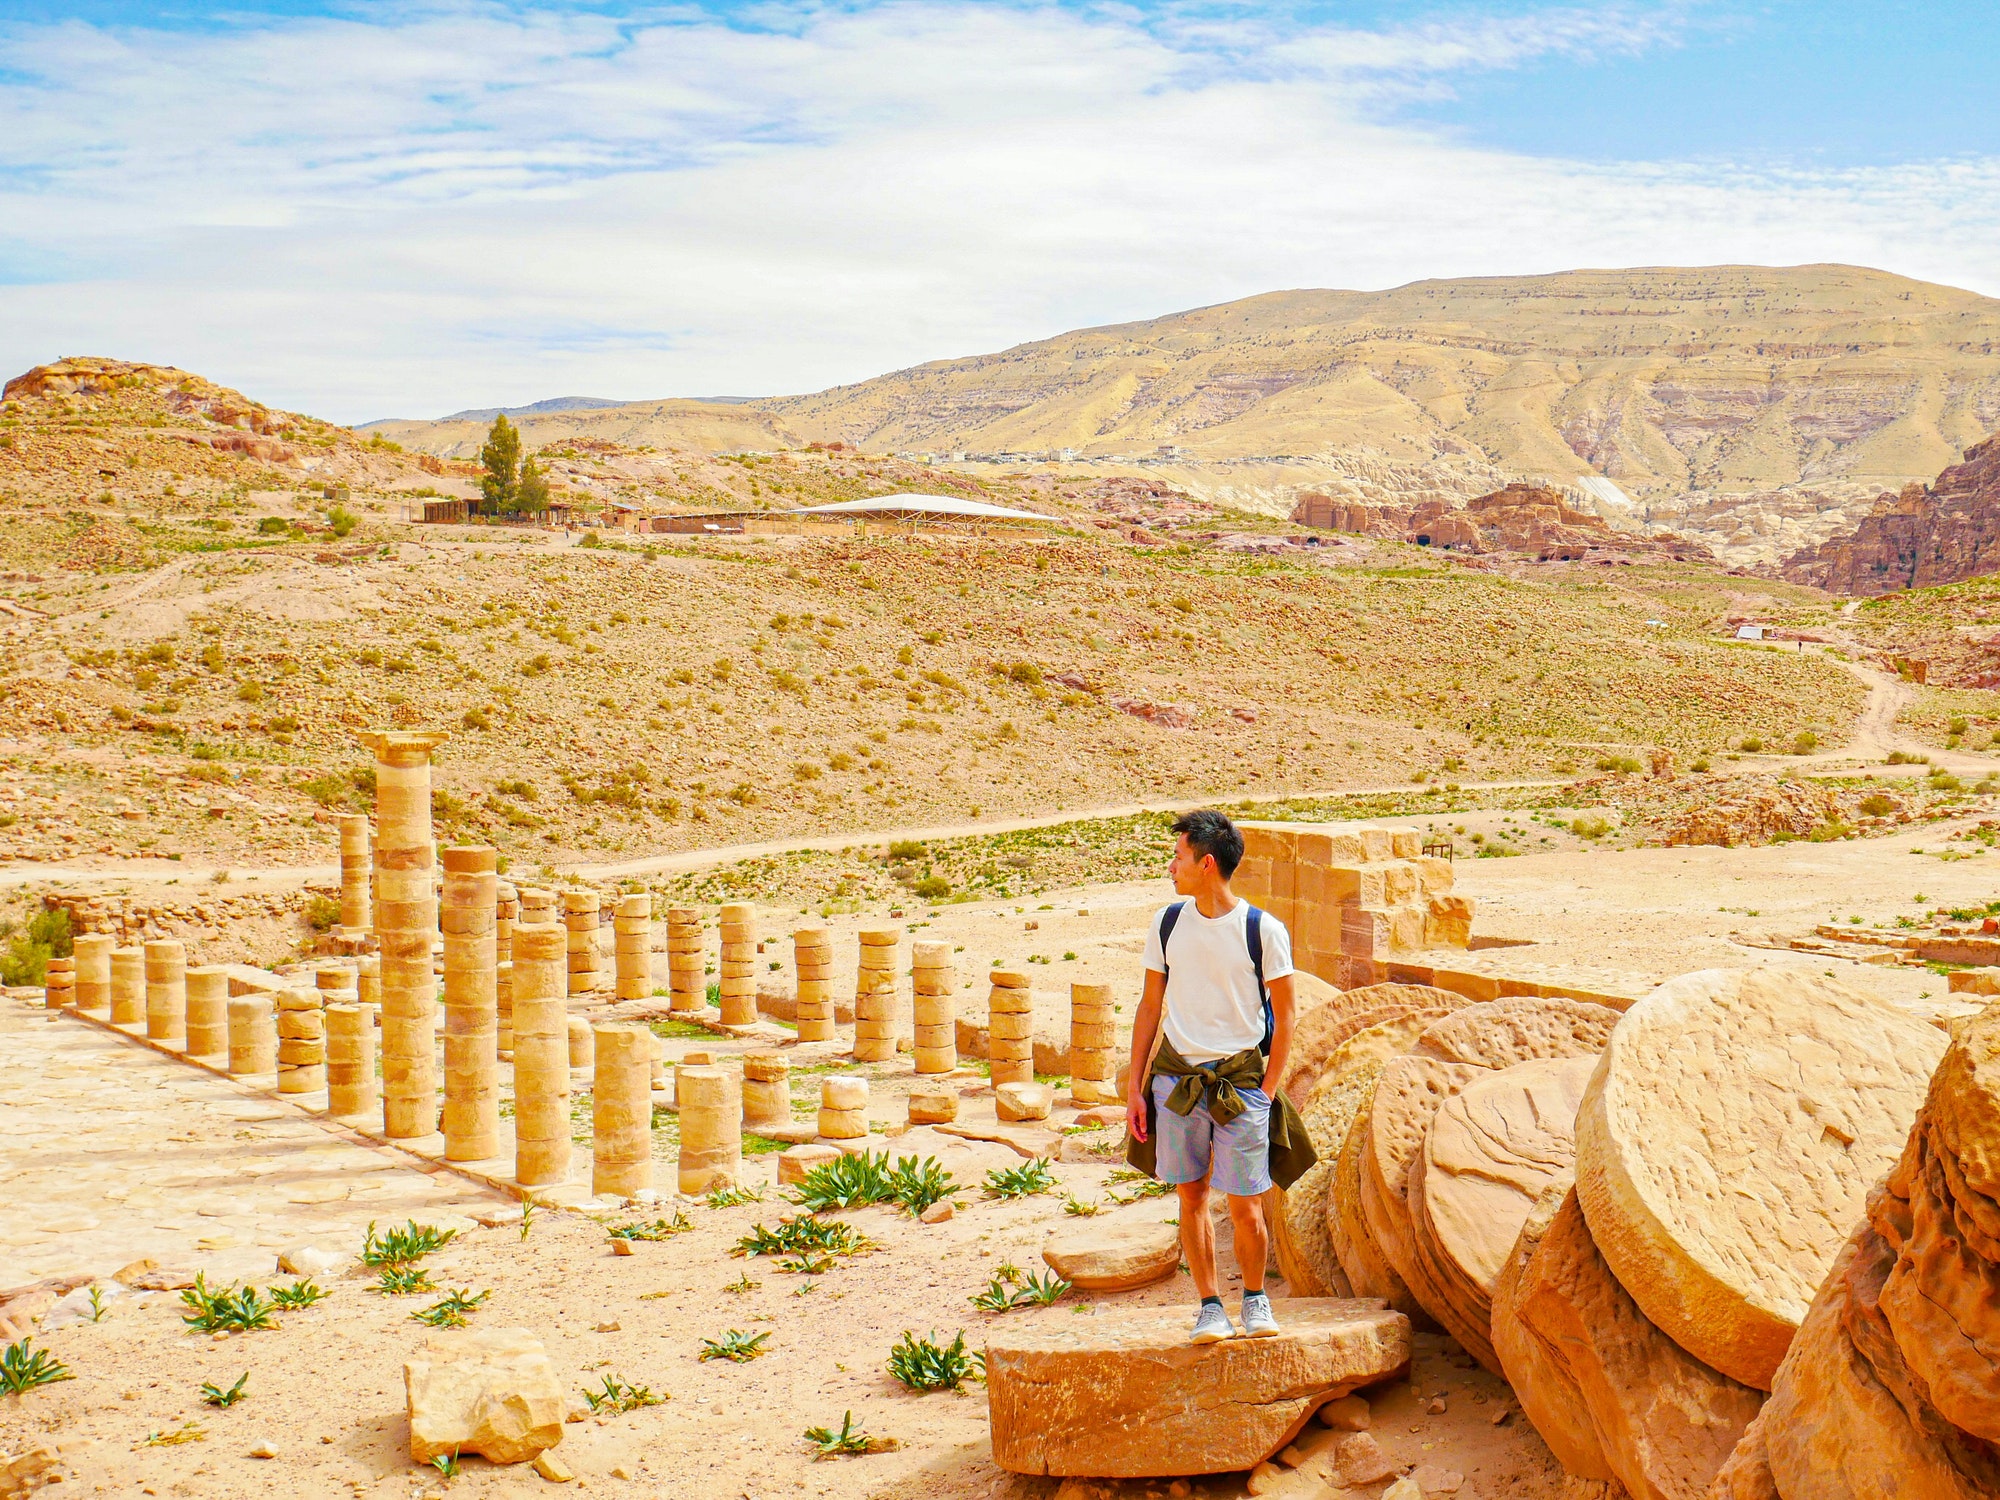 A traveler ( backpacker ) enjoying this beautiful landscape of the grand temple heritage